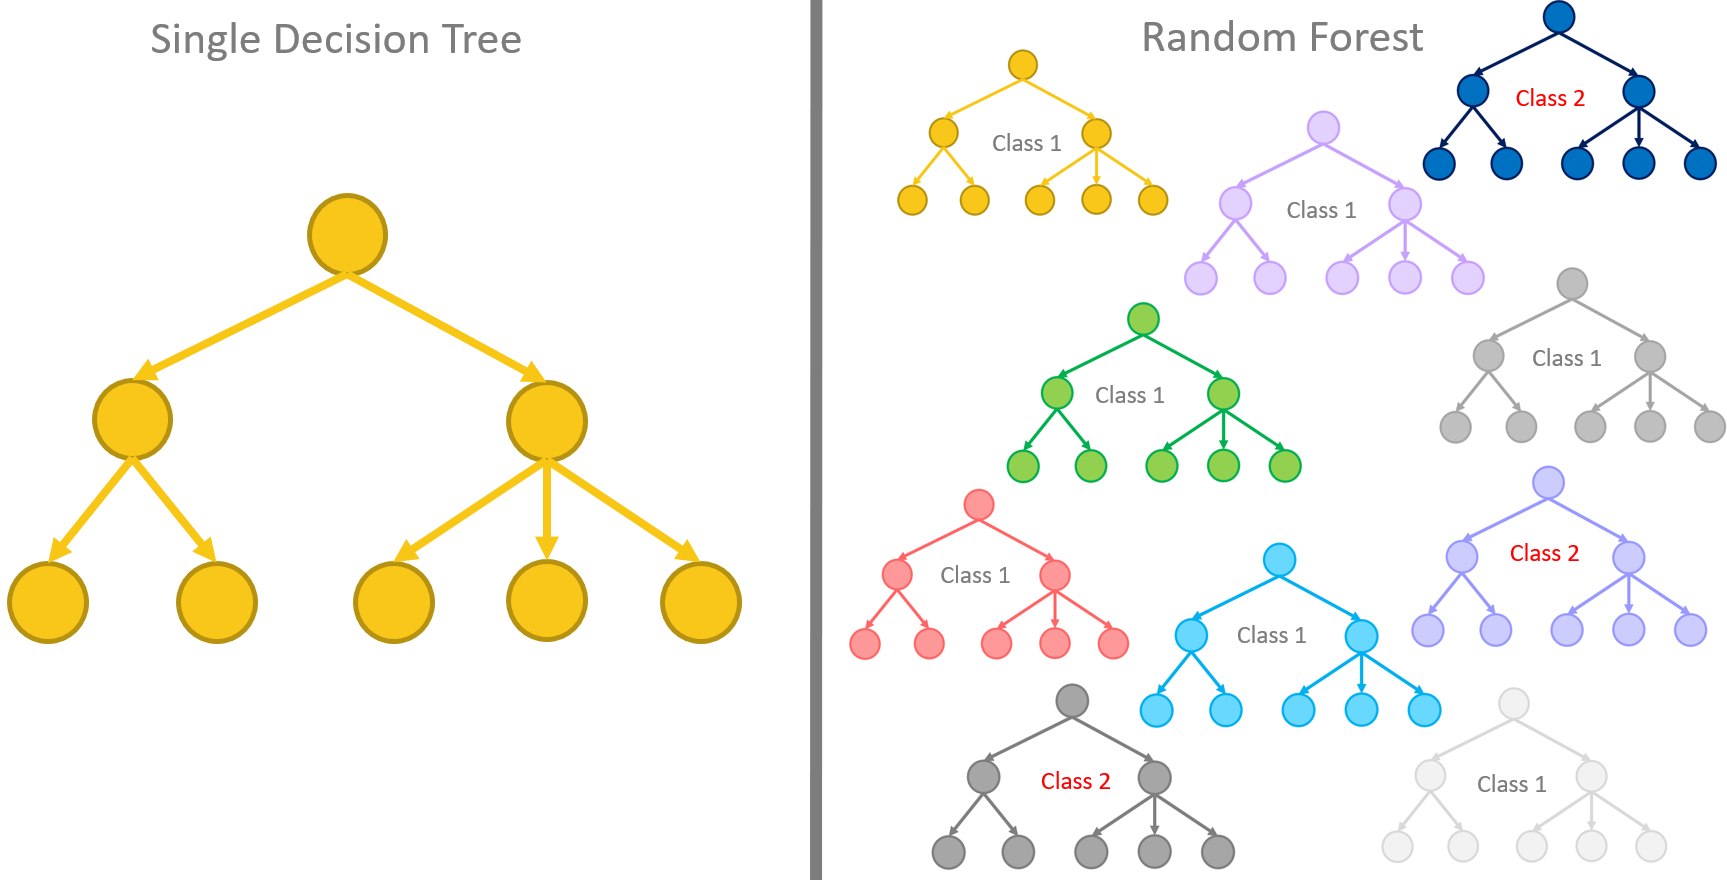 From a single decision tree to a random forest